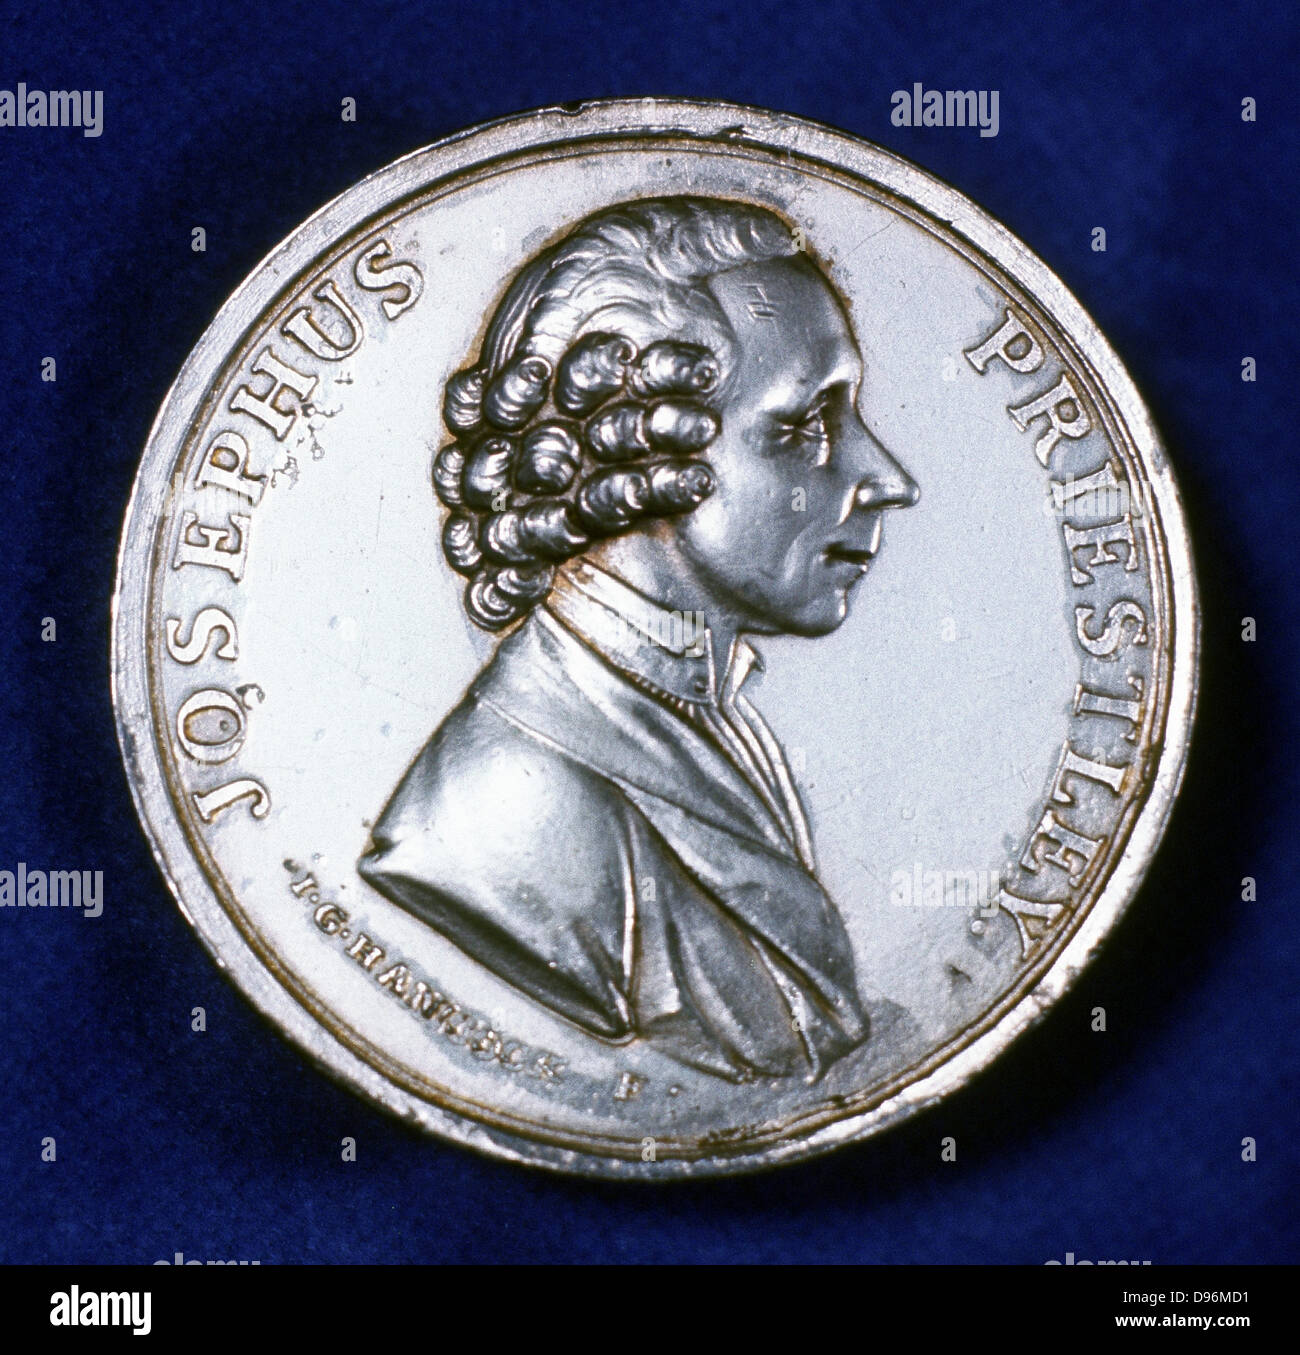 Joseph Priestley (1733-1804) English chemist and Presbyterian minister.  From obverse of commemorative medal dated 1803. Stock Photo